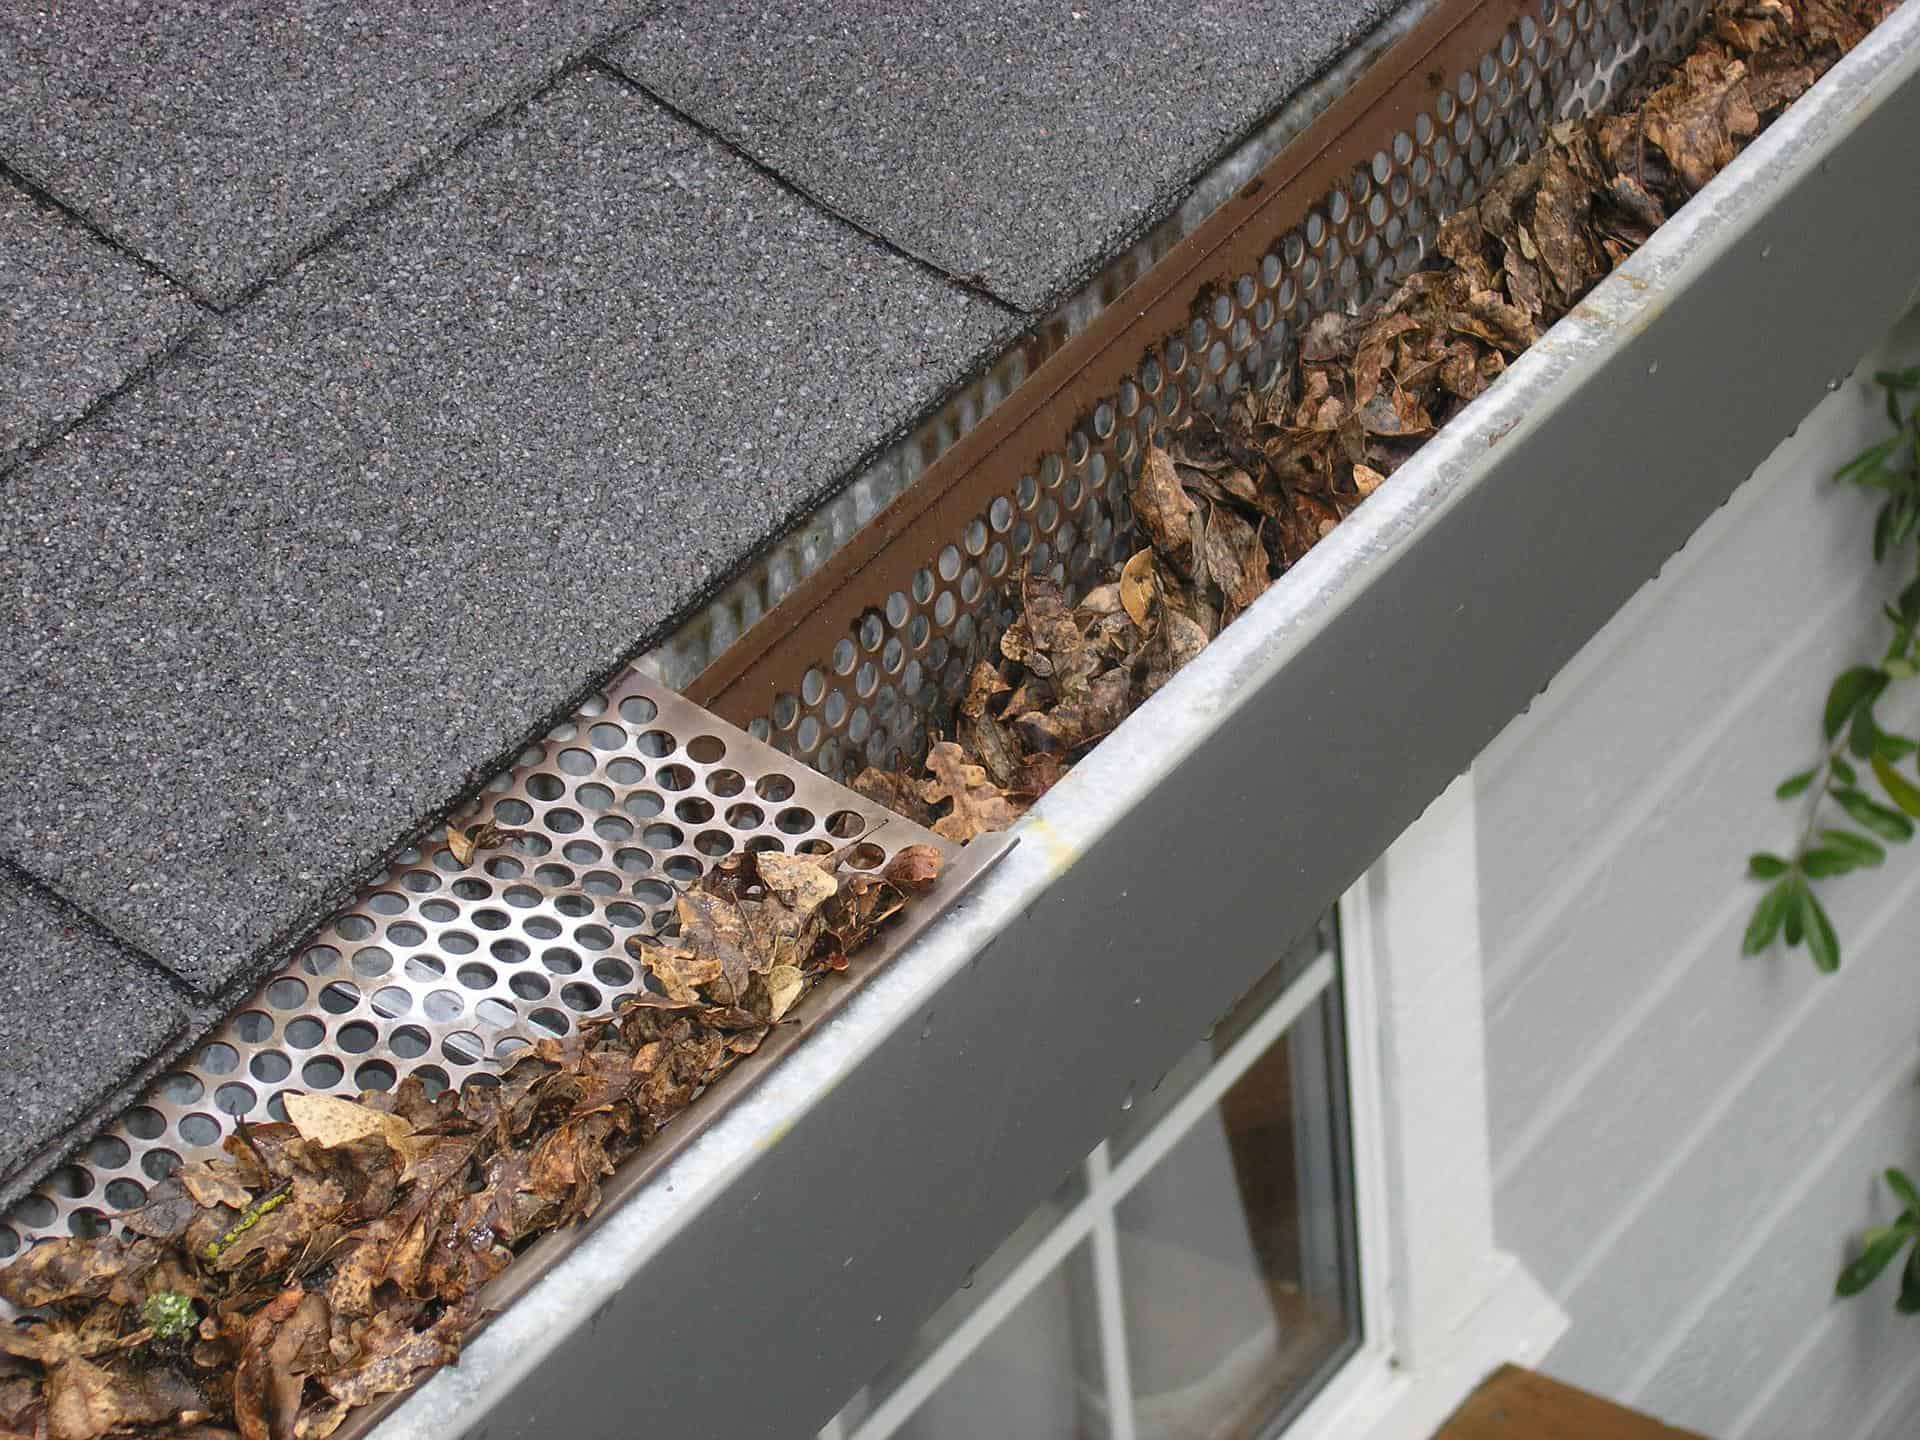 Gutter with leaf guards partially clogged with debris, requiring storm repair.